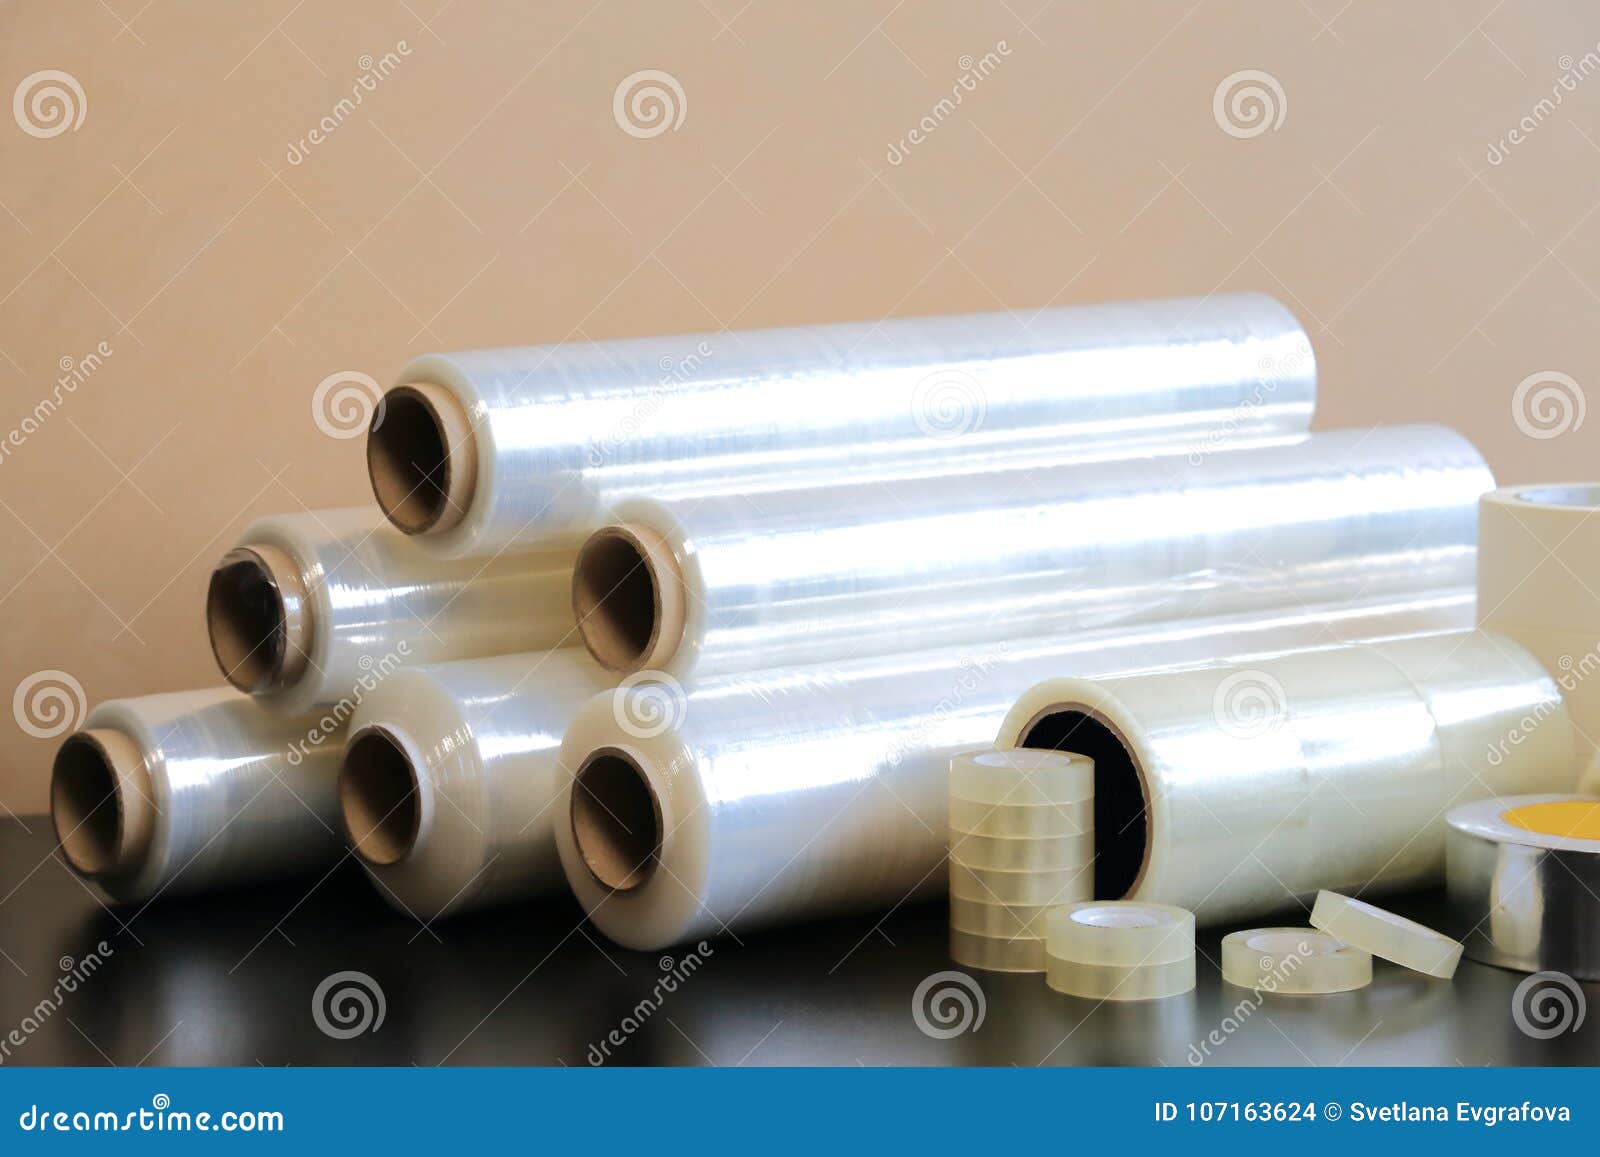 packaging materials: stretch film, adhesive tape, paint tape.